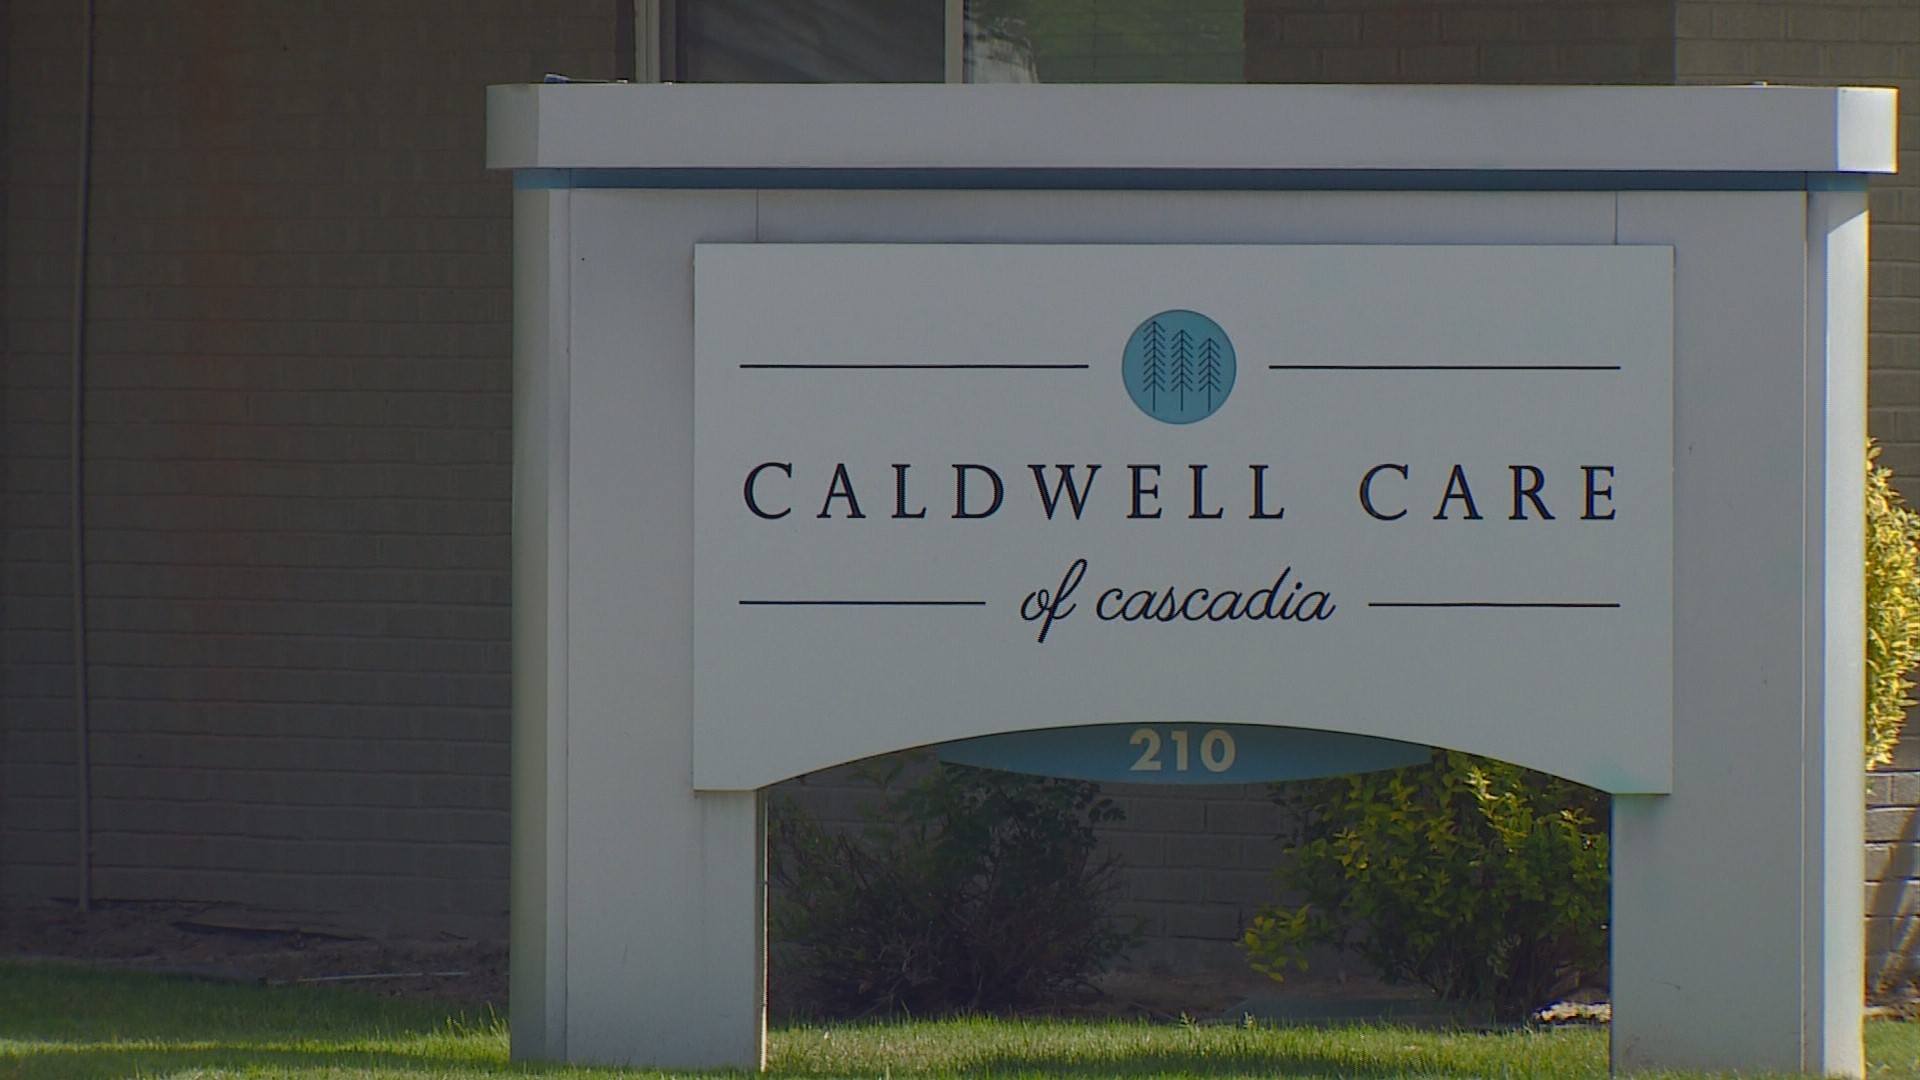 Caldwell Care of Cascadia and Wellspring Health and Rehabilitation of Cascadia in Nampa are among 400 nursing homes named on the list.